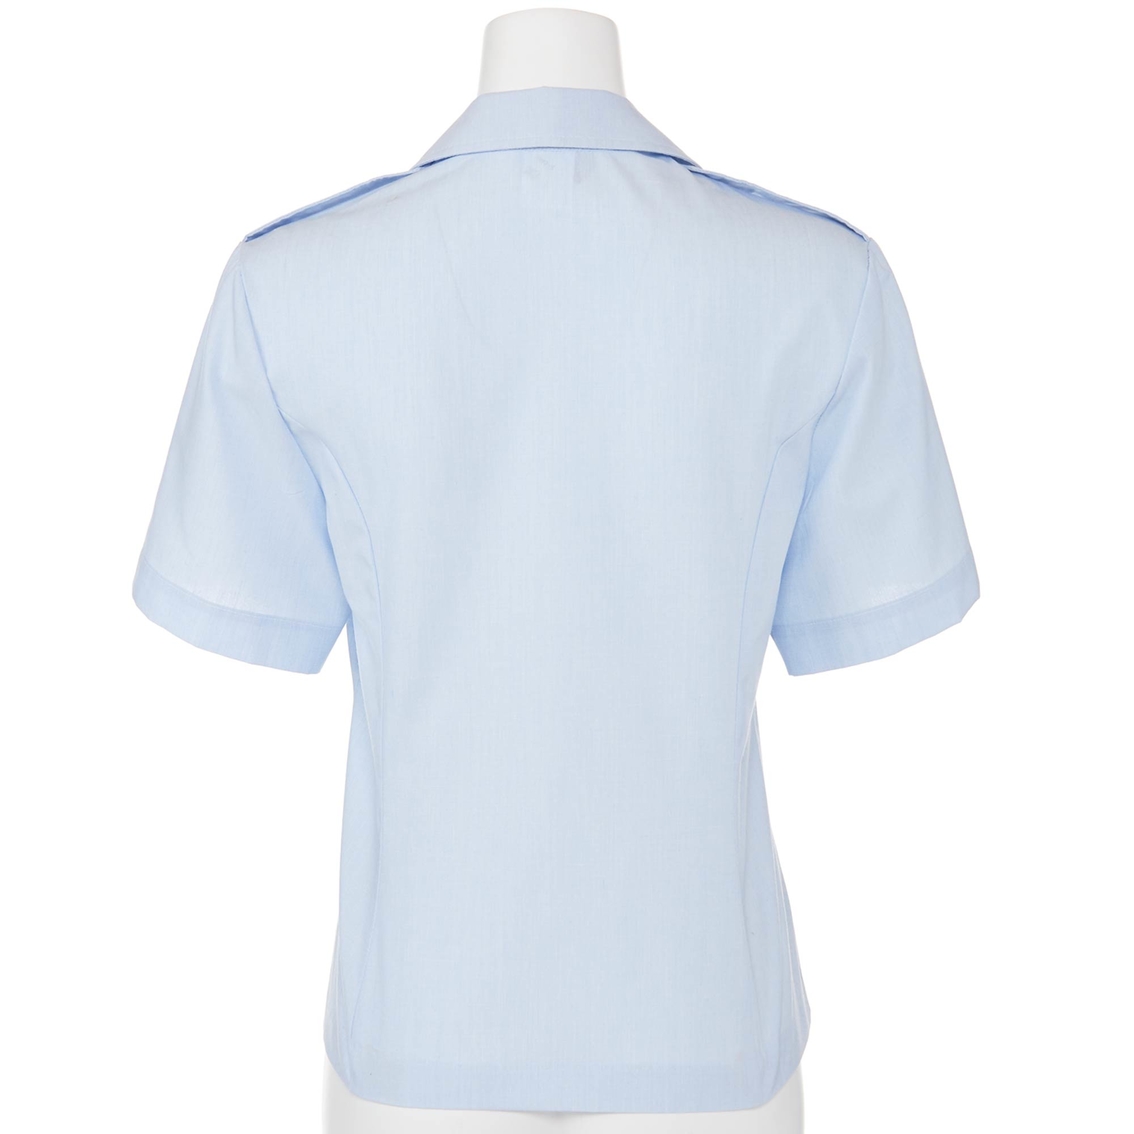 Air Force Female Short Sleeve Overblouse - Image 2 of 2